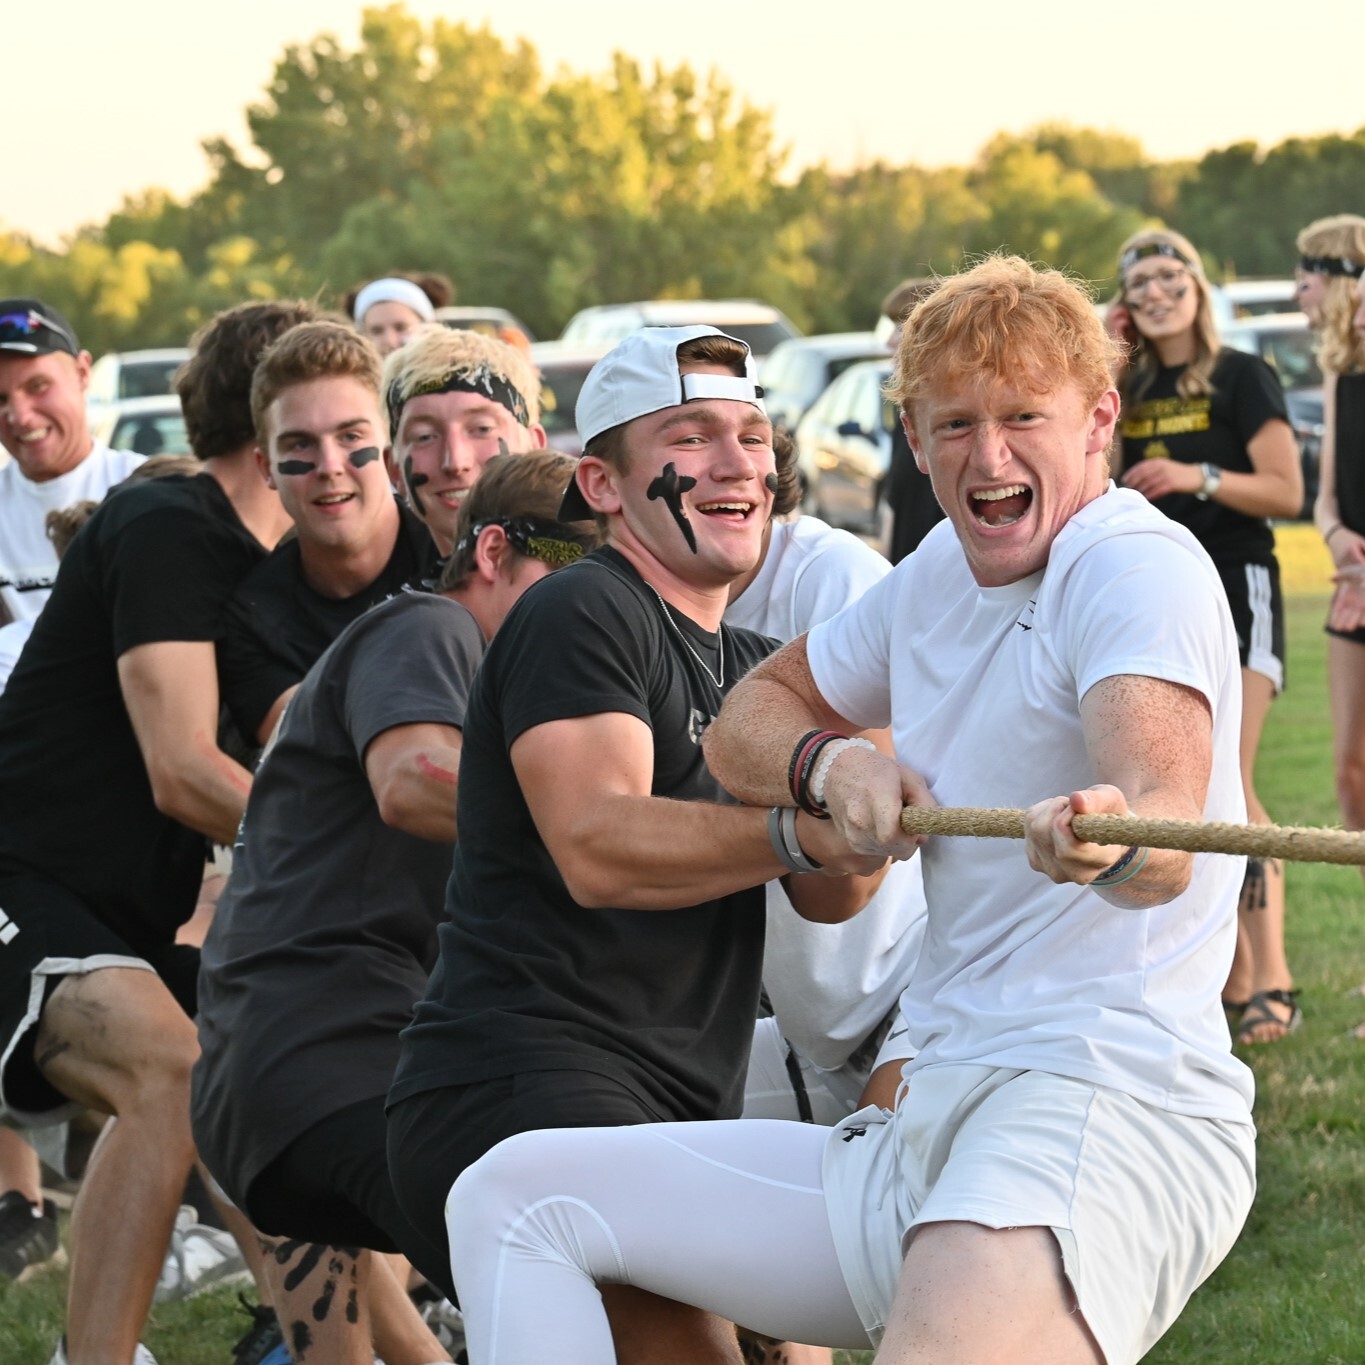 Male students playing a game of Tug-of-War